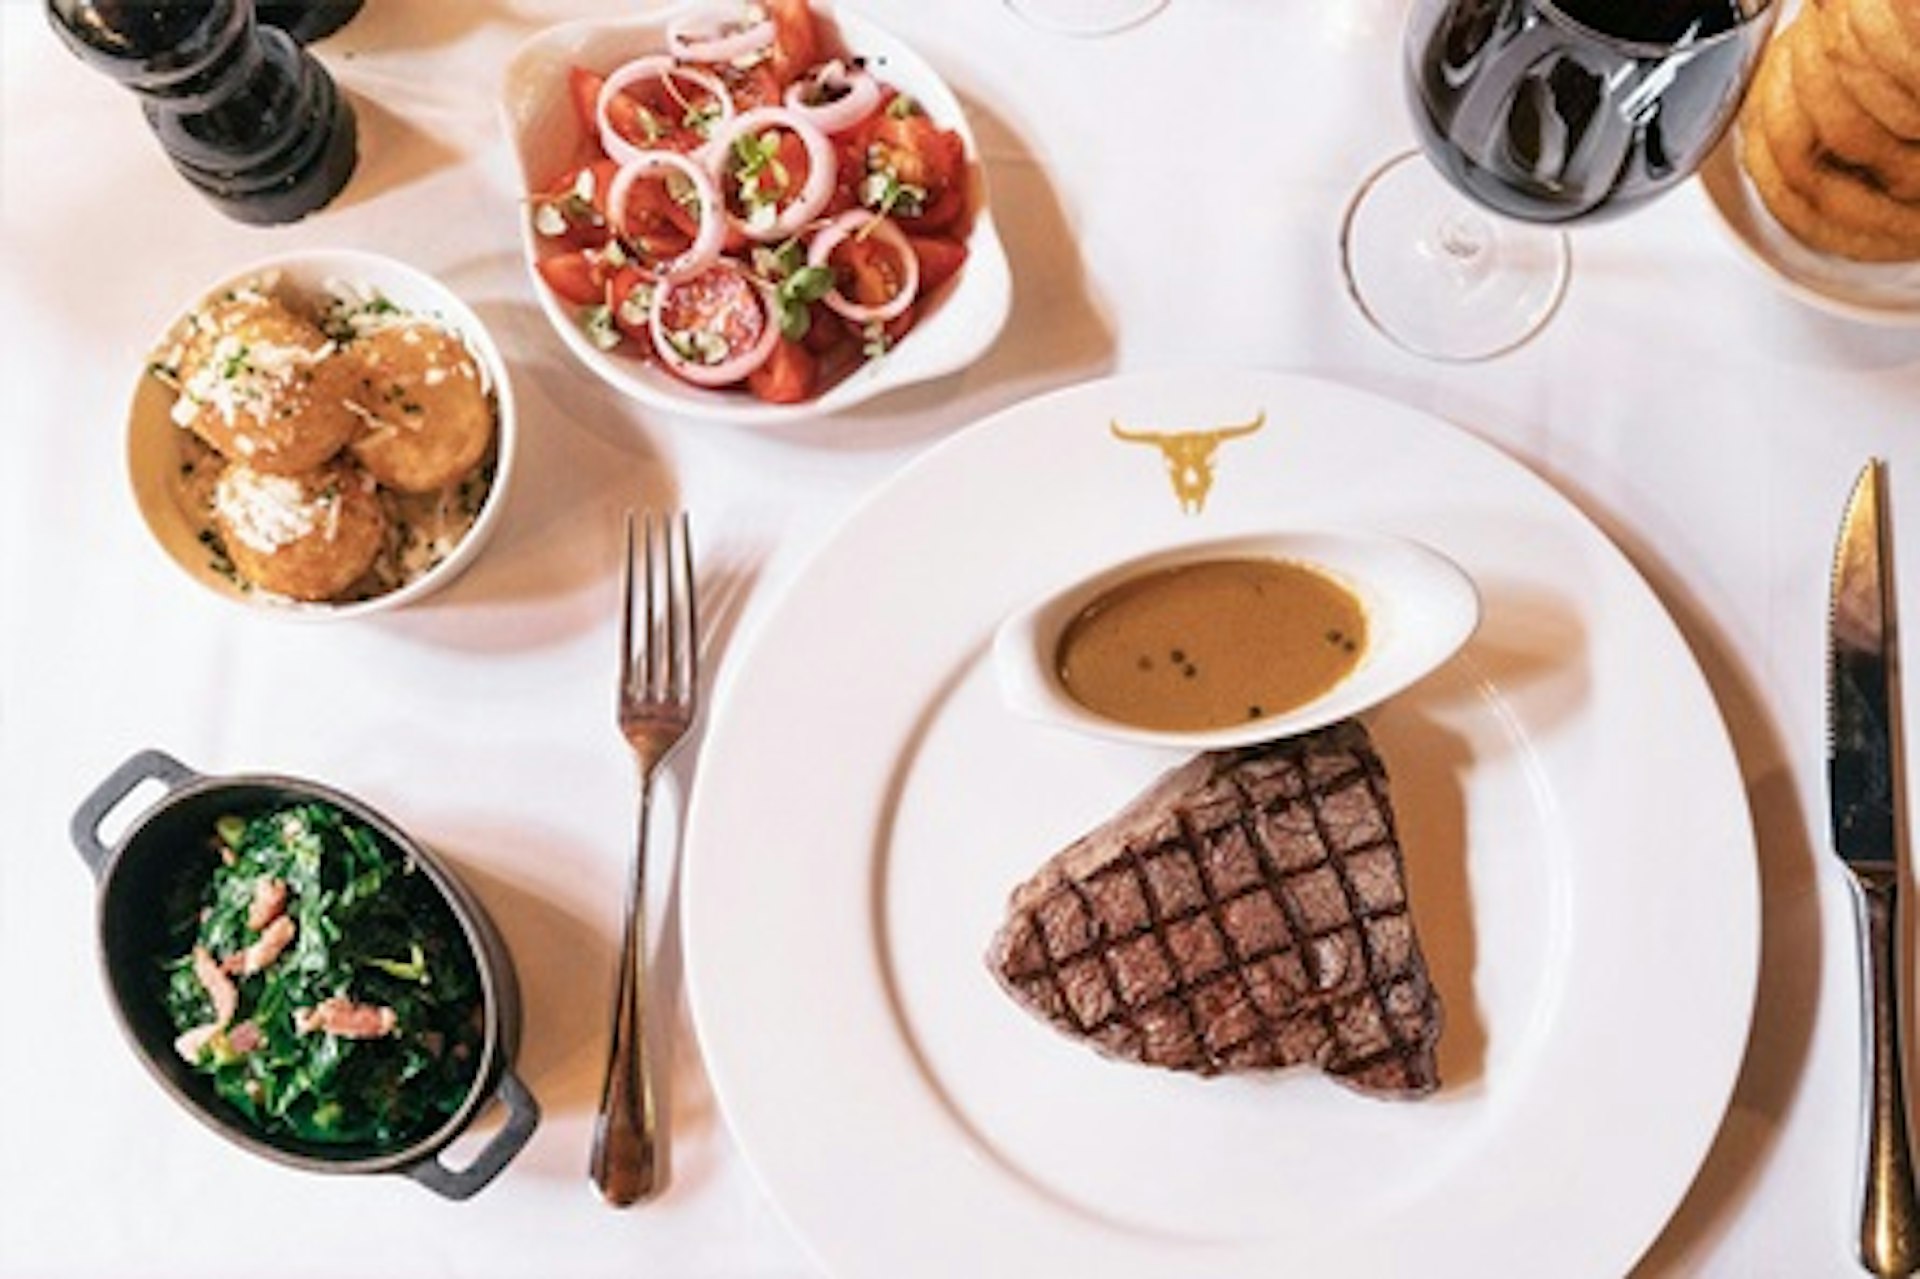 Complete Dining Experience with Wine for Two at Marco Pierre White's London Steakhouse Co 2